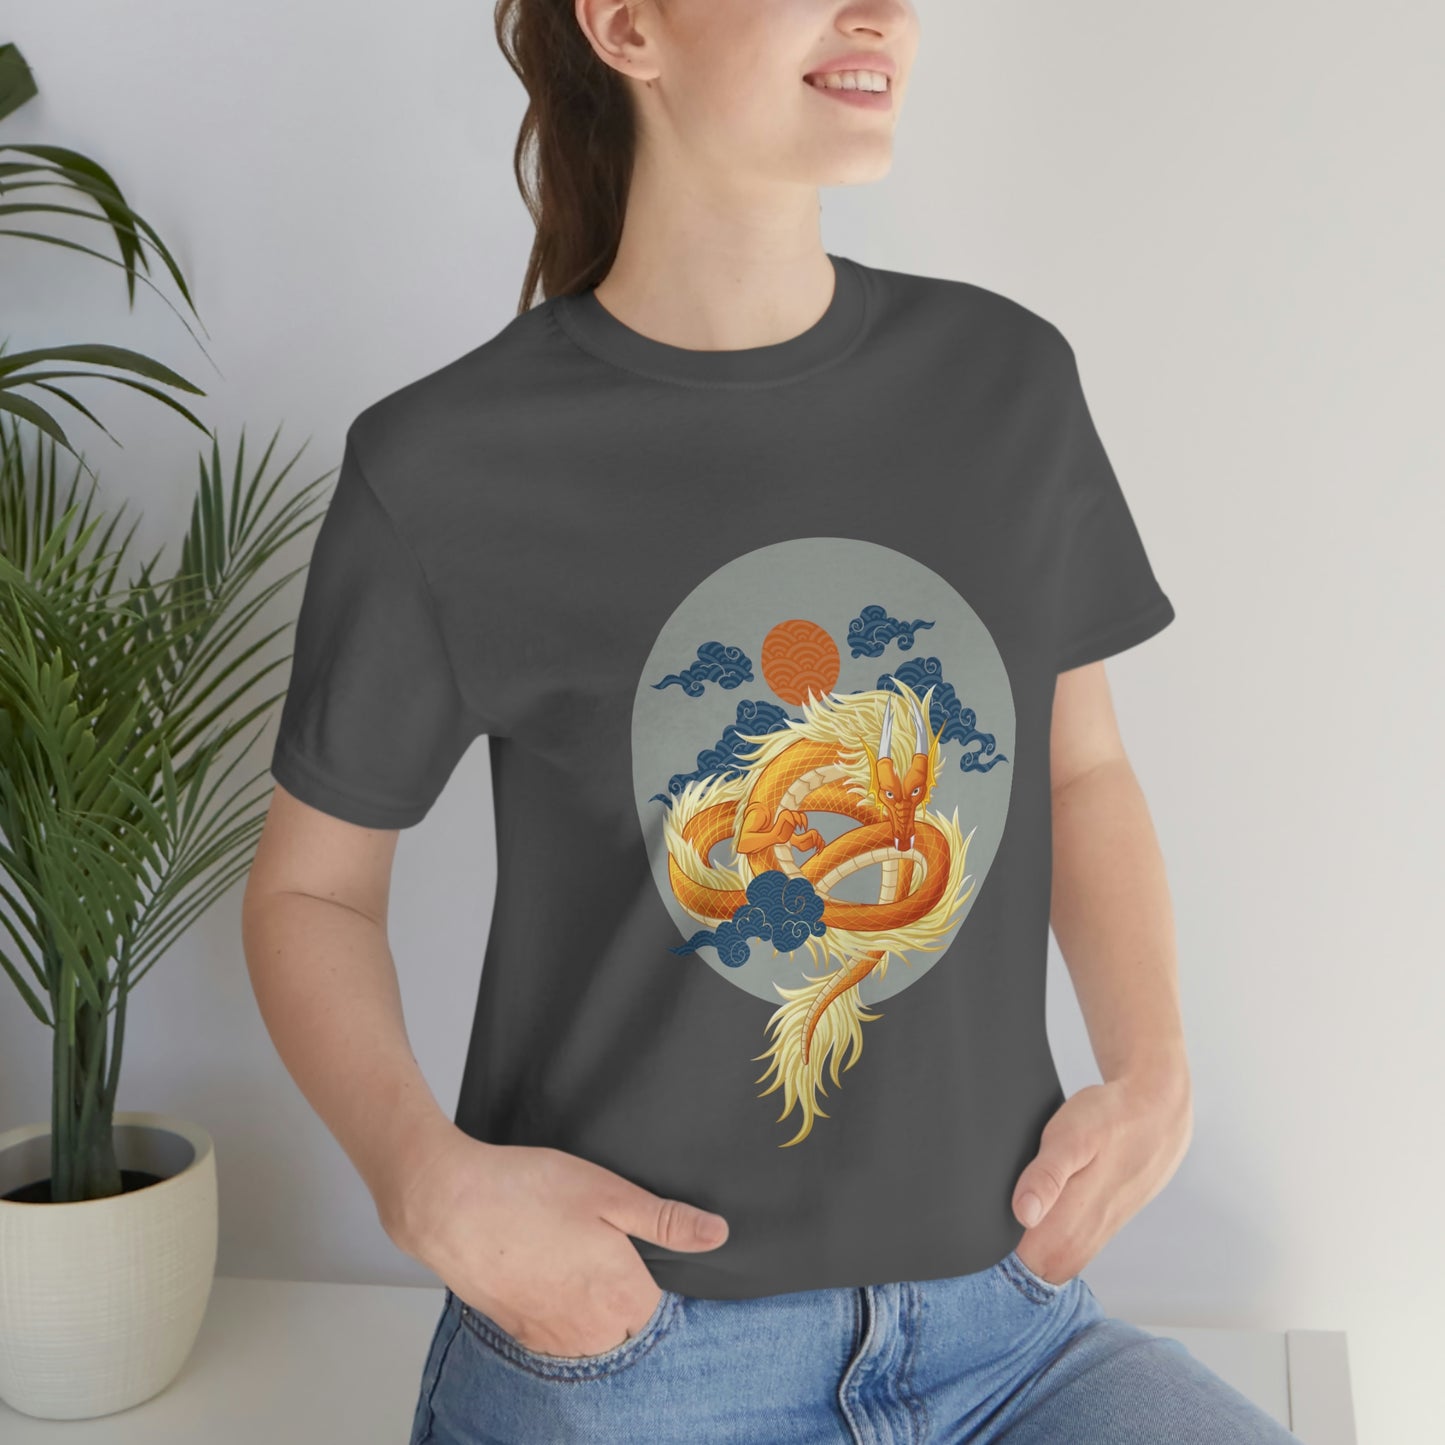 "Dragon's Fury" - Unisex Jersey Short Sleeve Tee Featuring an Exquisite Chinese Dragon Design.